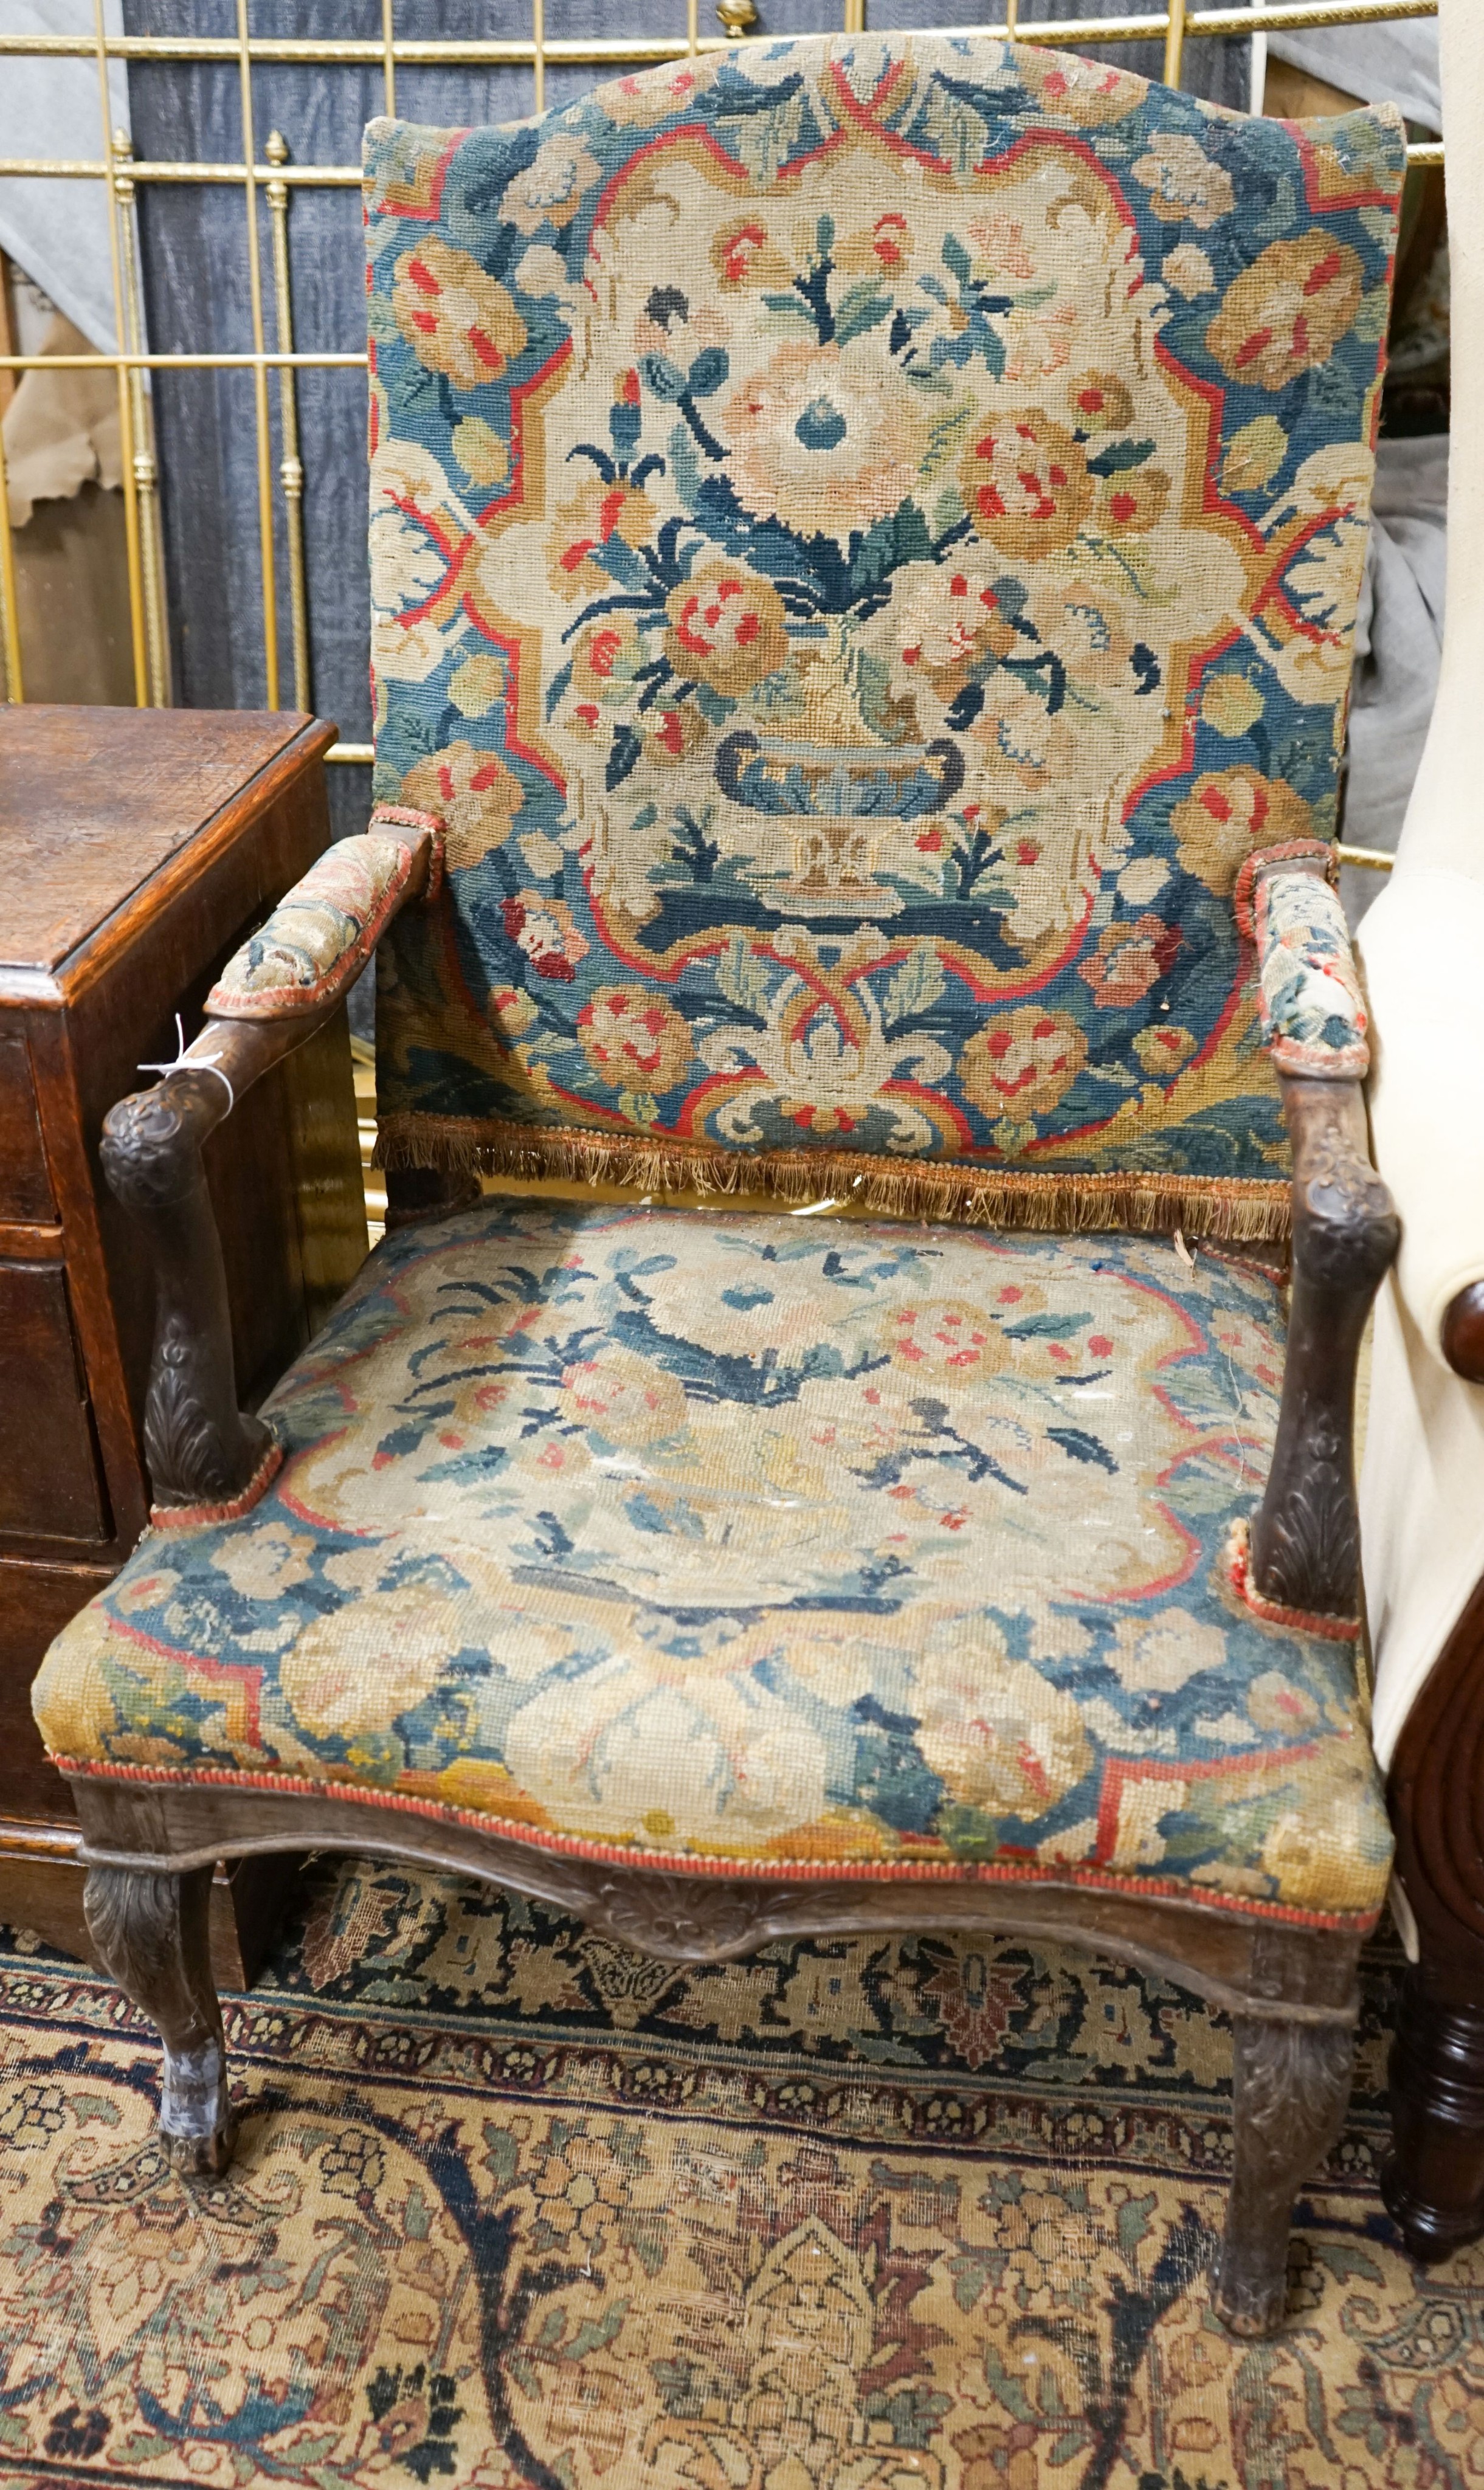 An 18th century French carved walnut elbow chair with tapestry upholstery, width 60cm, depth 58cm, height 104cm